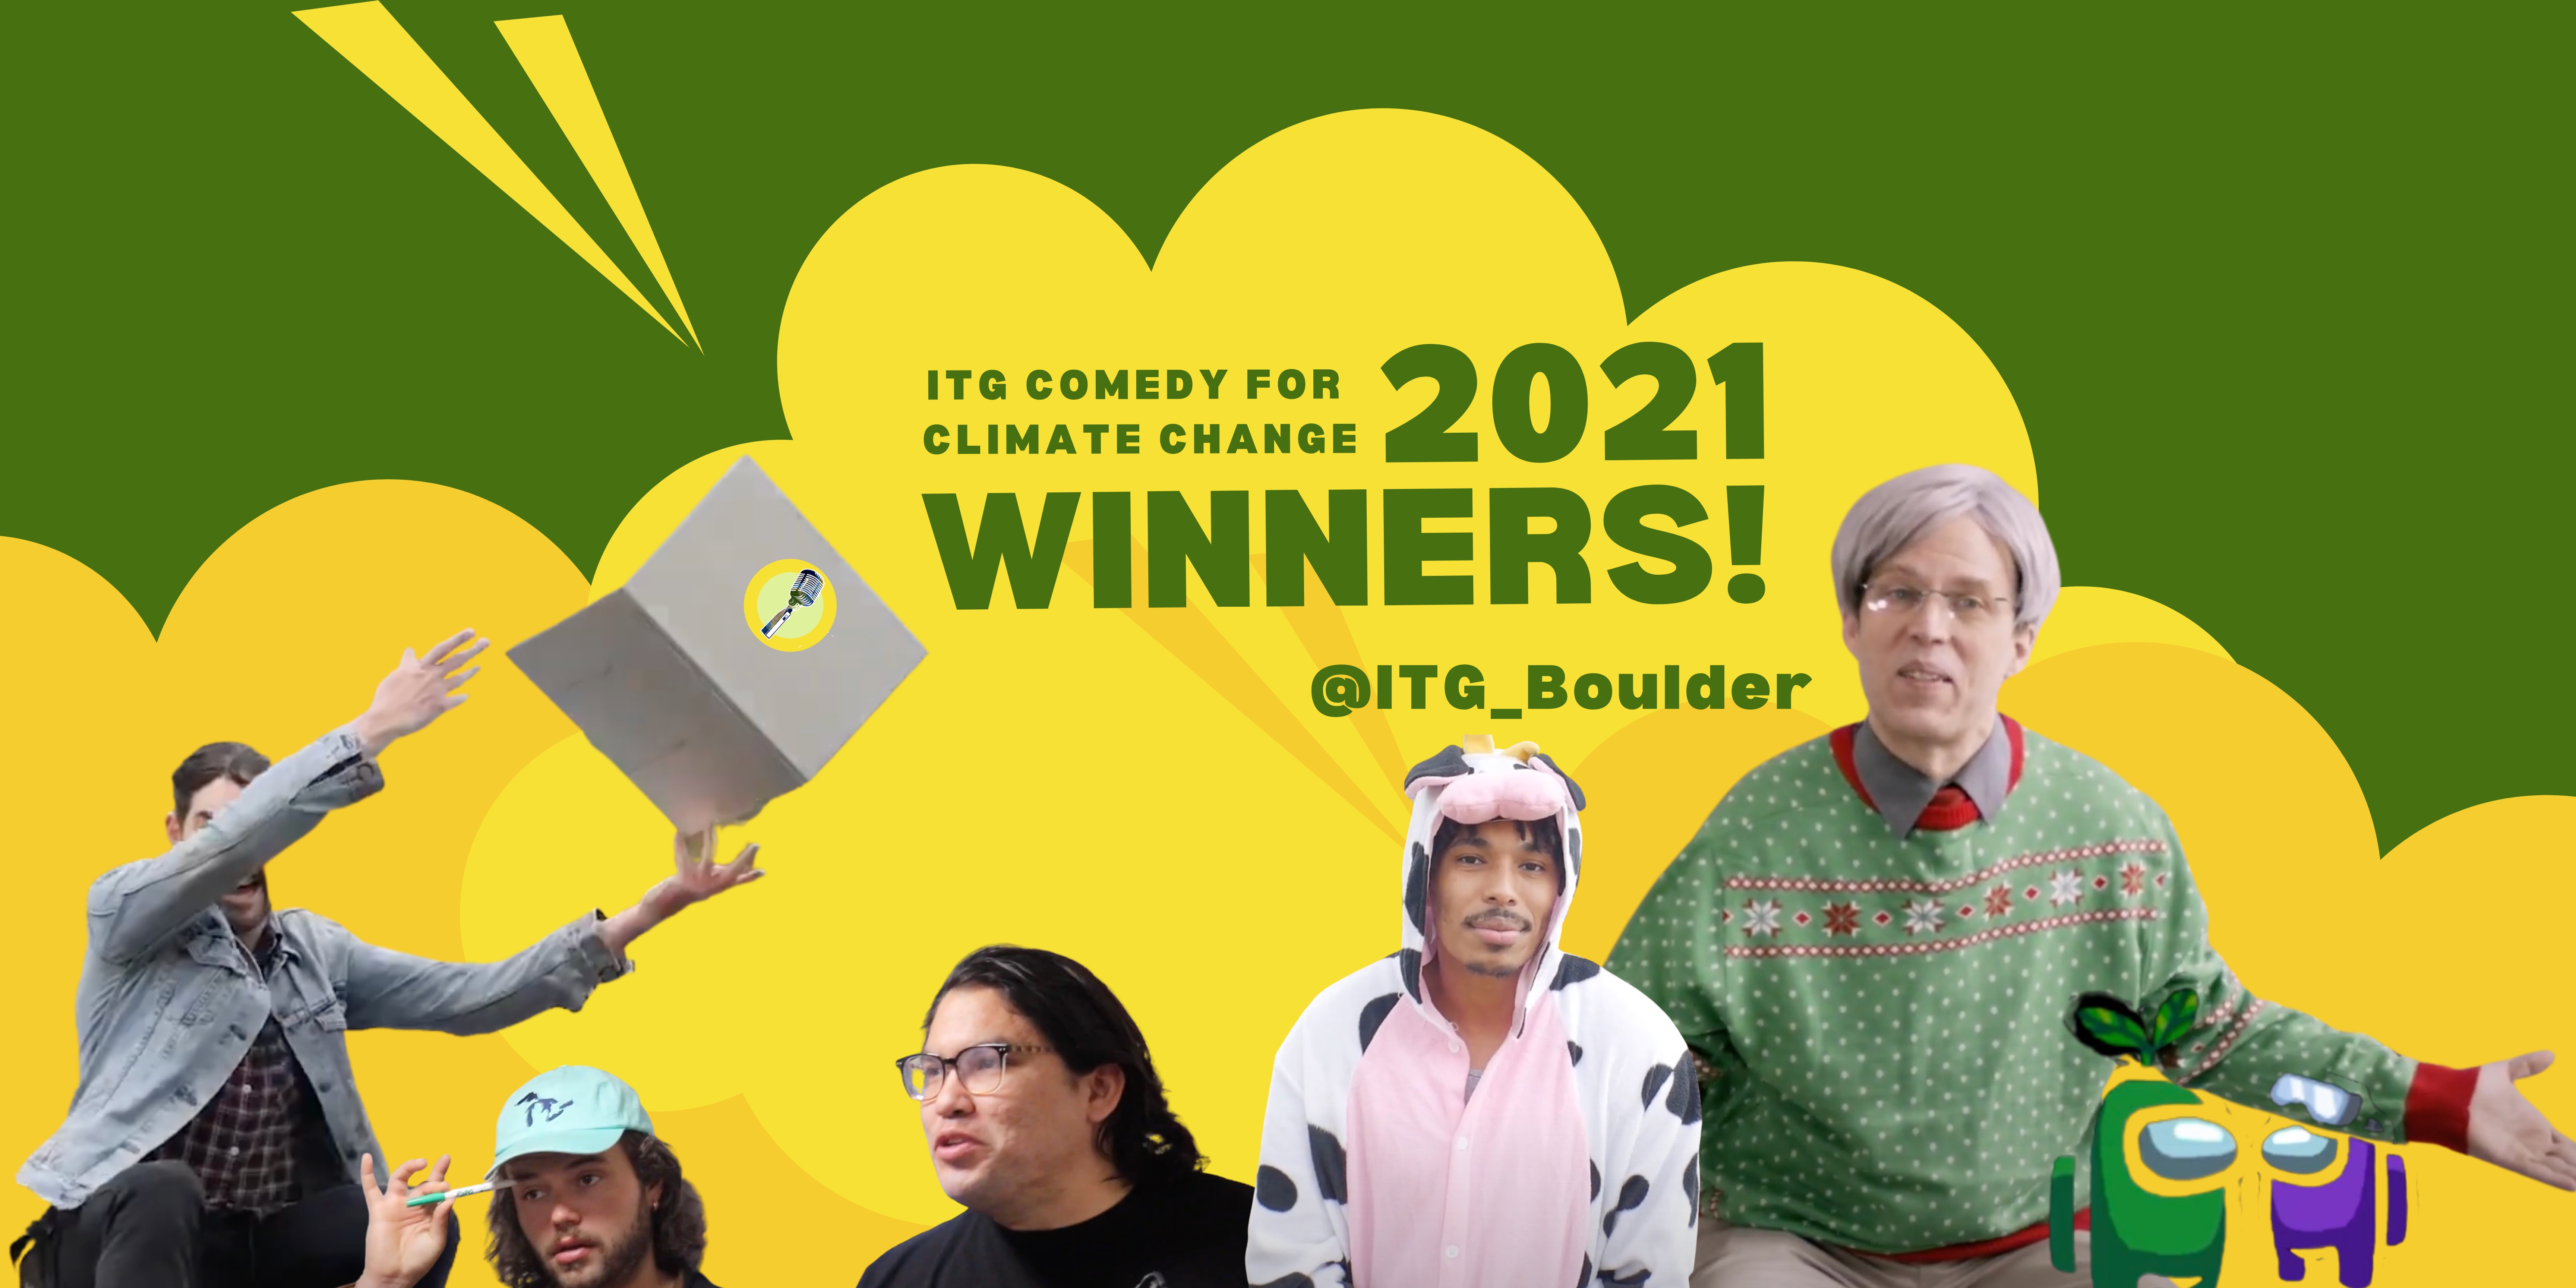 ITG Comedy for Climate Change Winners on Green and Yellow Background with images from winning videos. Images from left to right: Man throwing laptop, man with hat and pen, man with glasses, man in cow costume,  man in Christmas sweater, Green and Purple Among Us avatars.